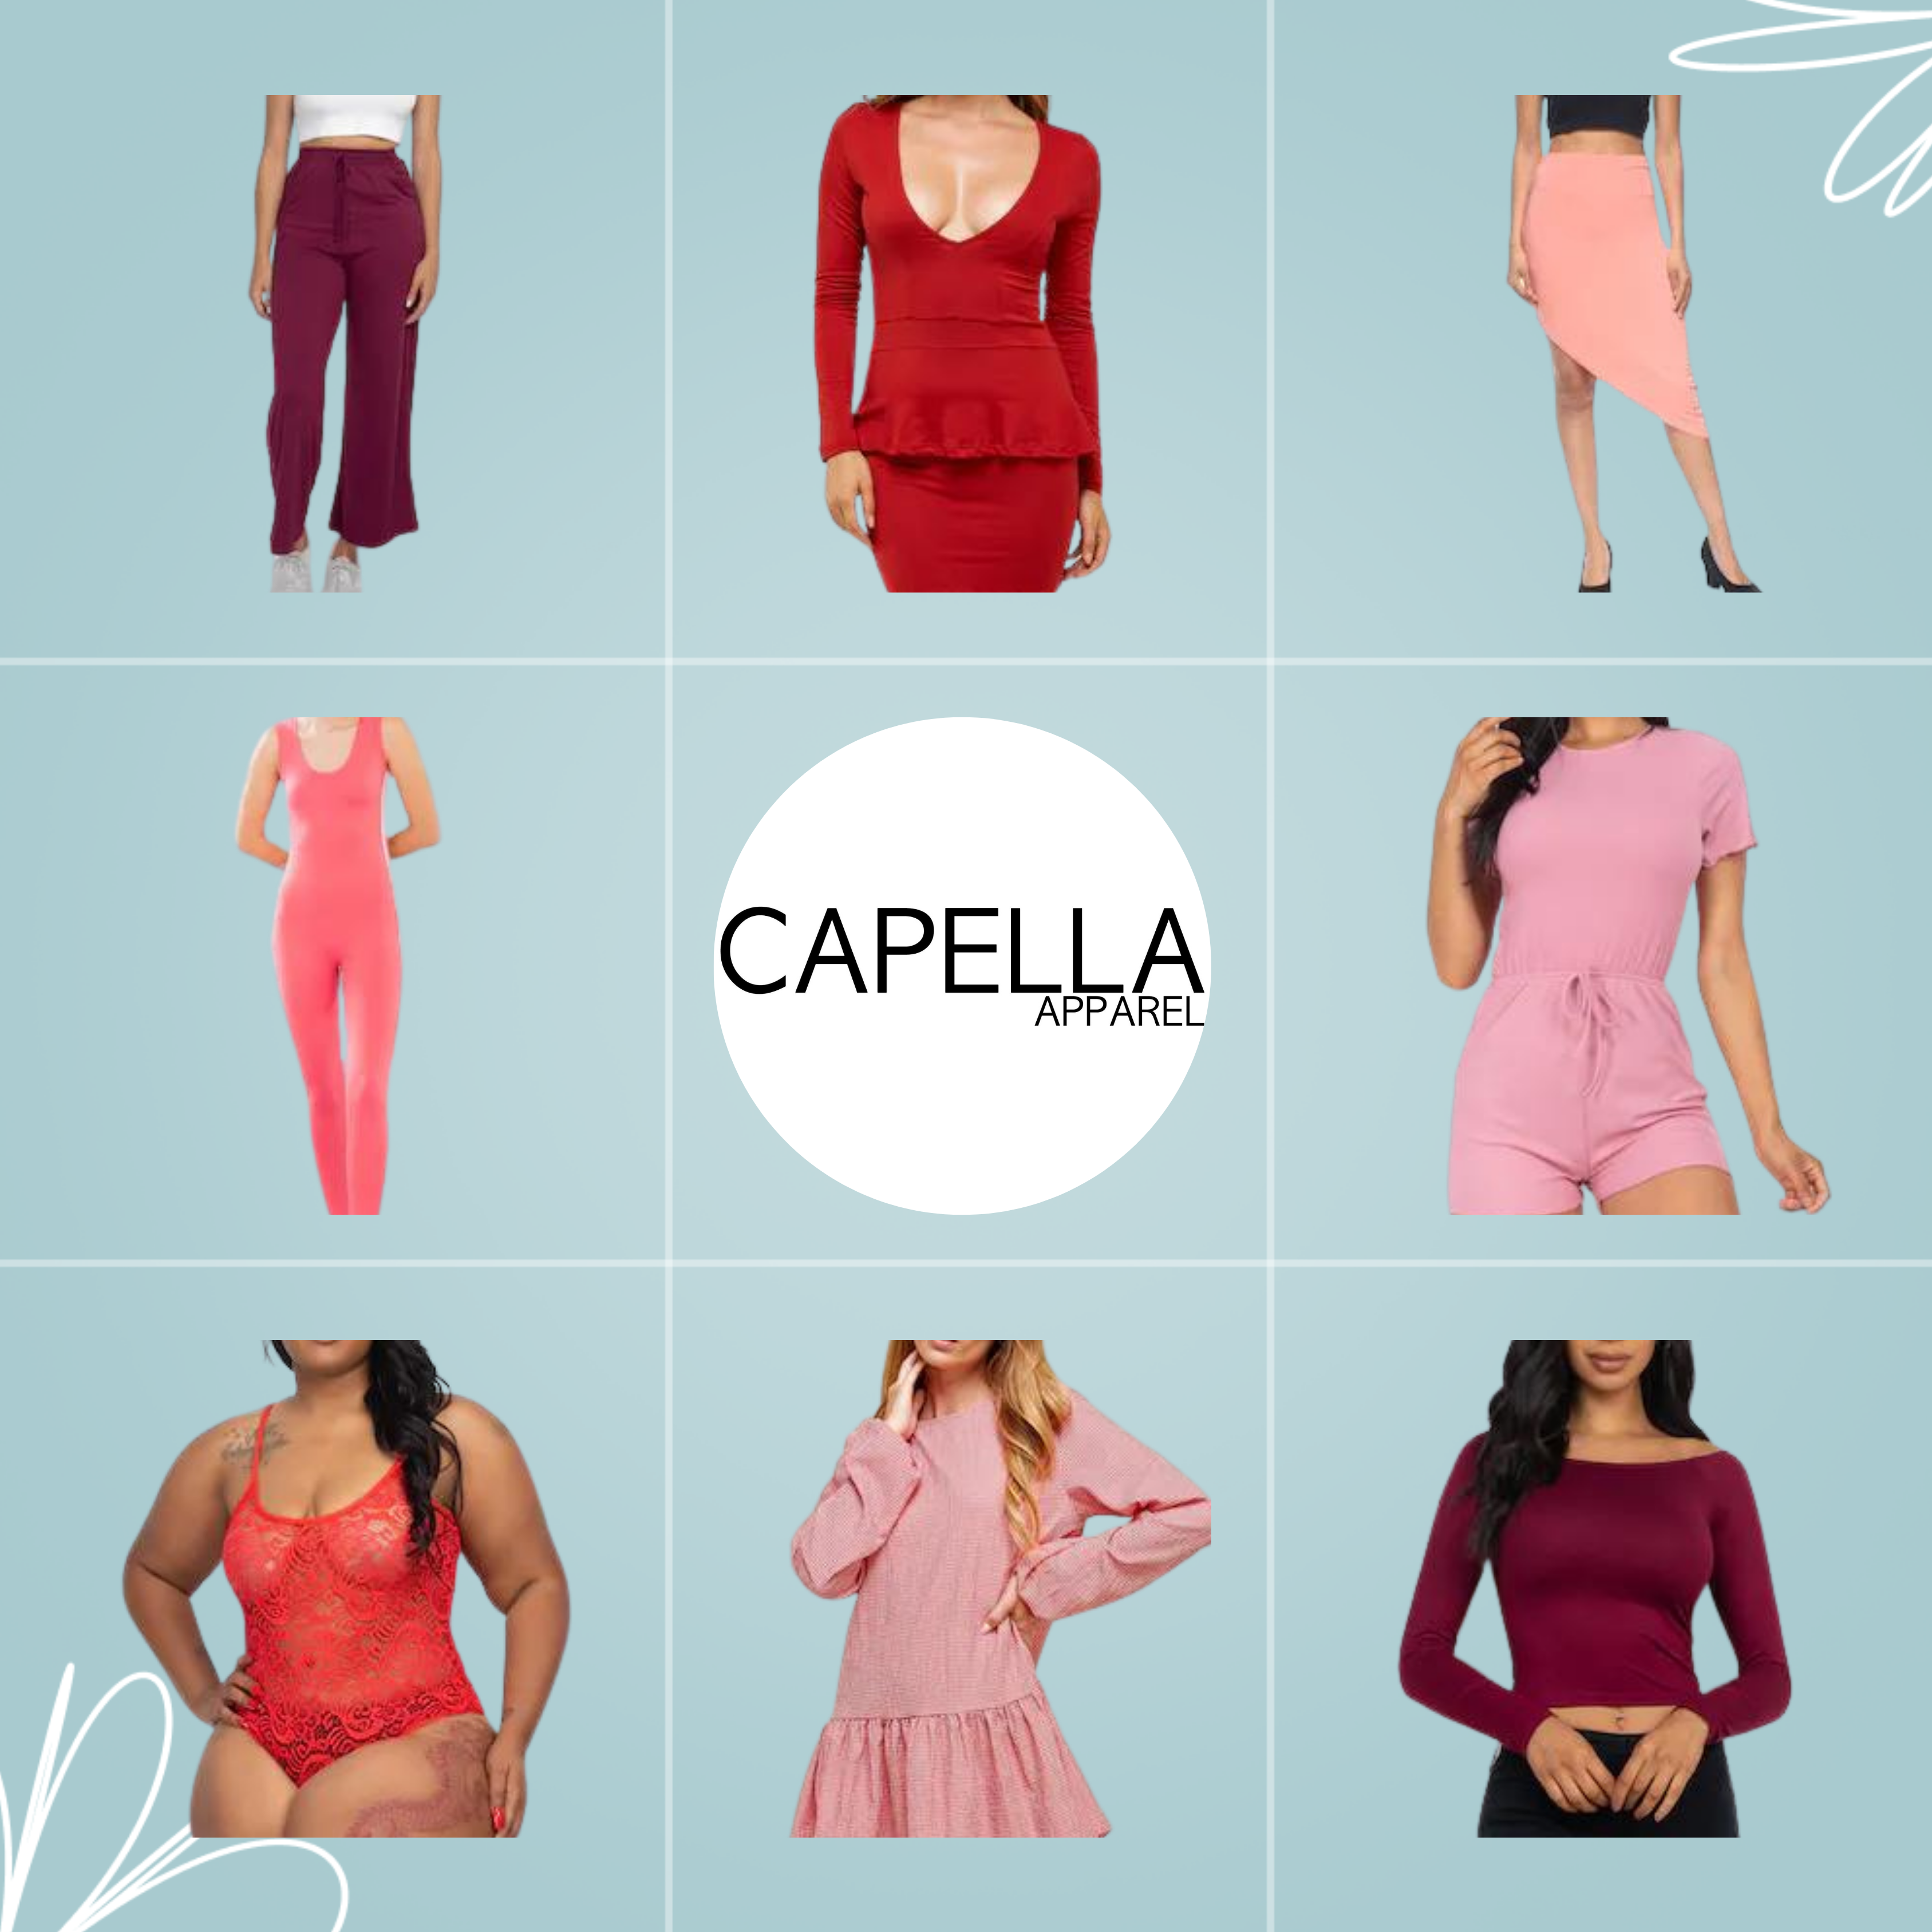 Brand image for Capella Outlet